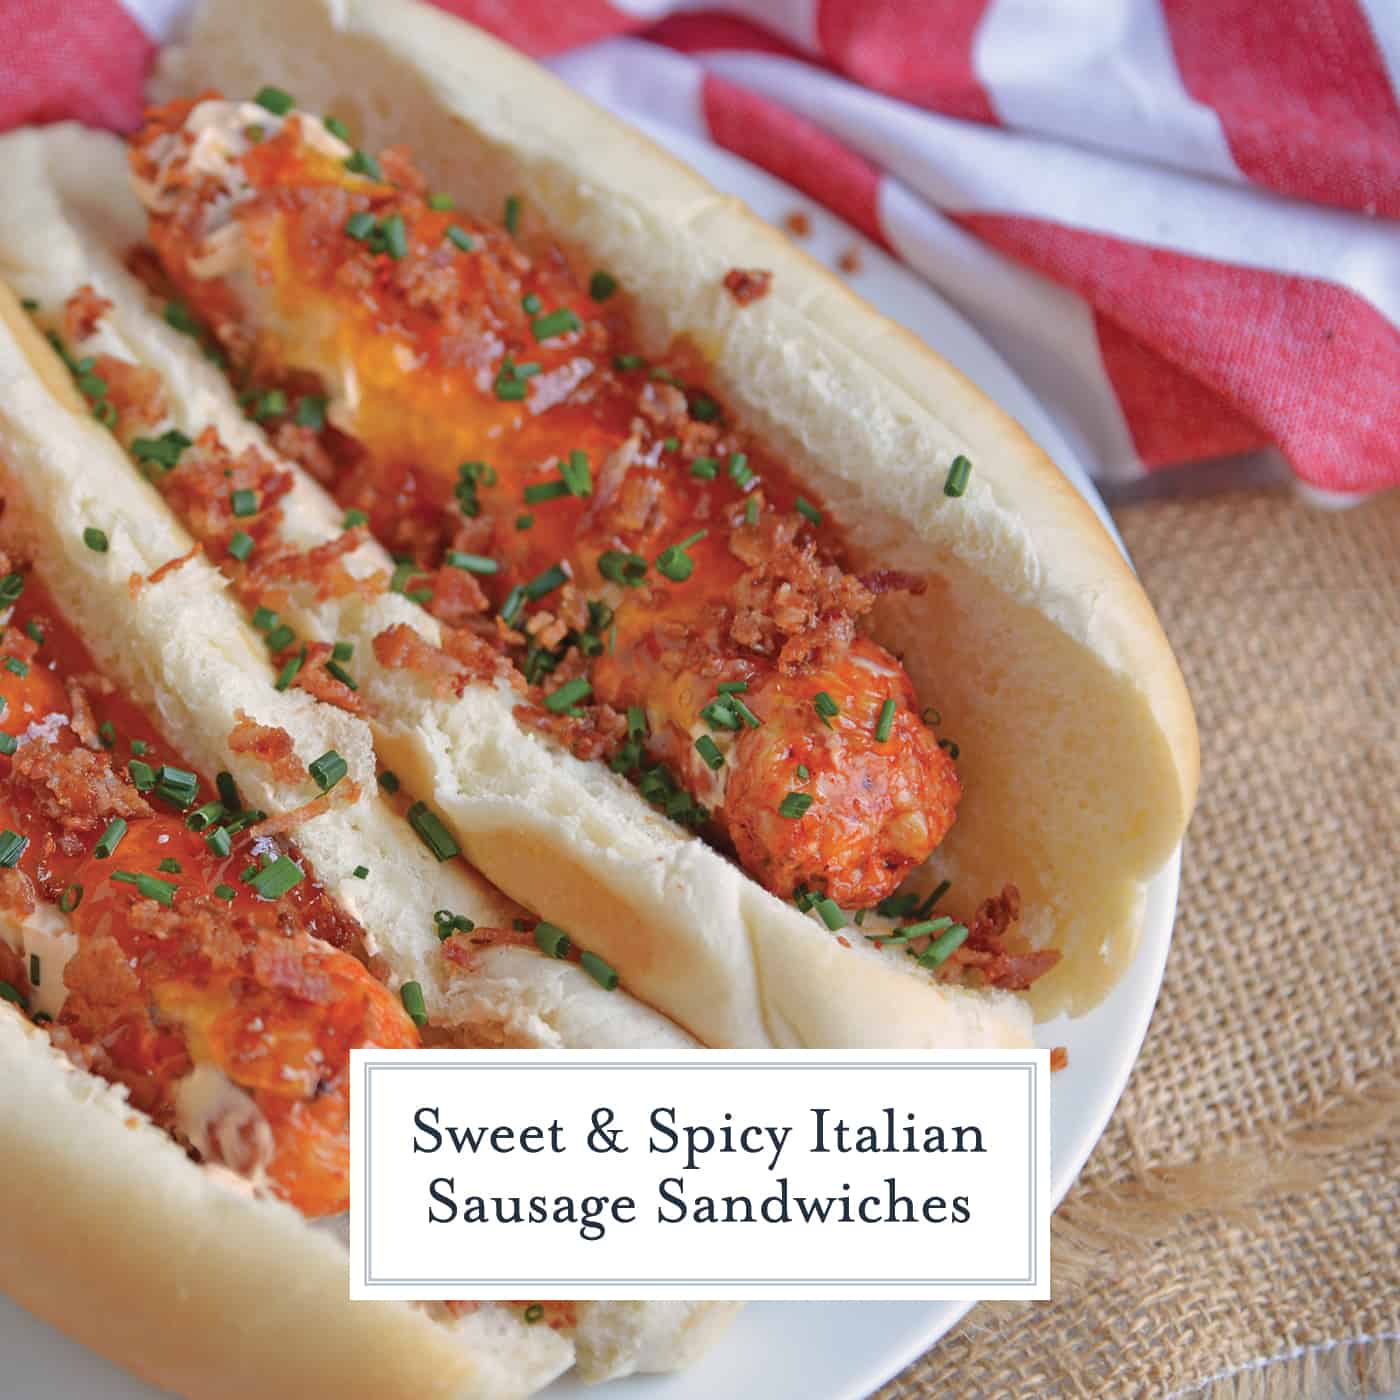 Sweet and Spicy Italian Sausage Sandwiches combine spicy Italian sausage with hot sauce spiked cream cheese with sweet apricot jam, salty bacon and chives. #sausagesandwiches www.savoryexperiments.com 